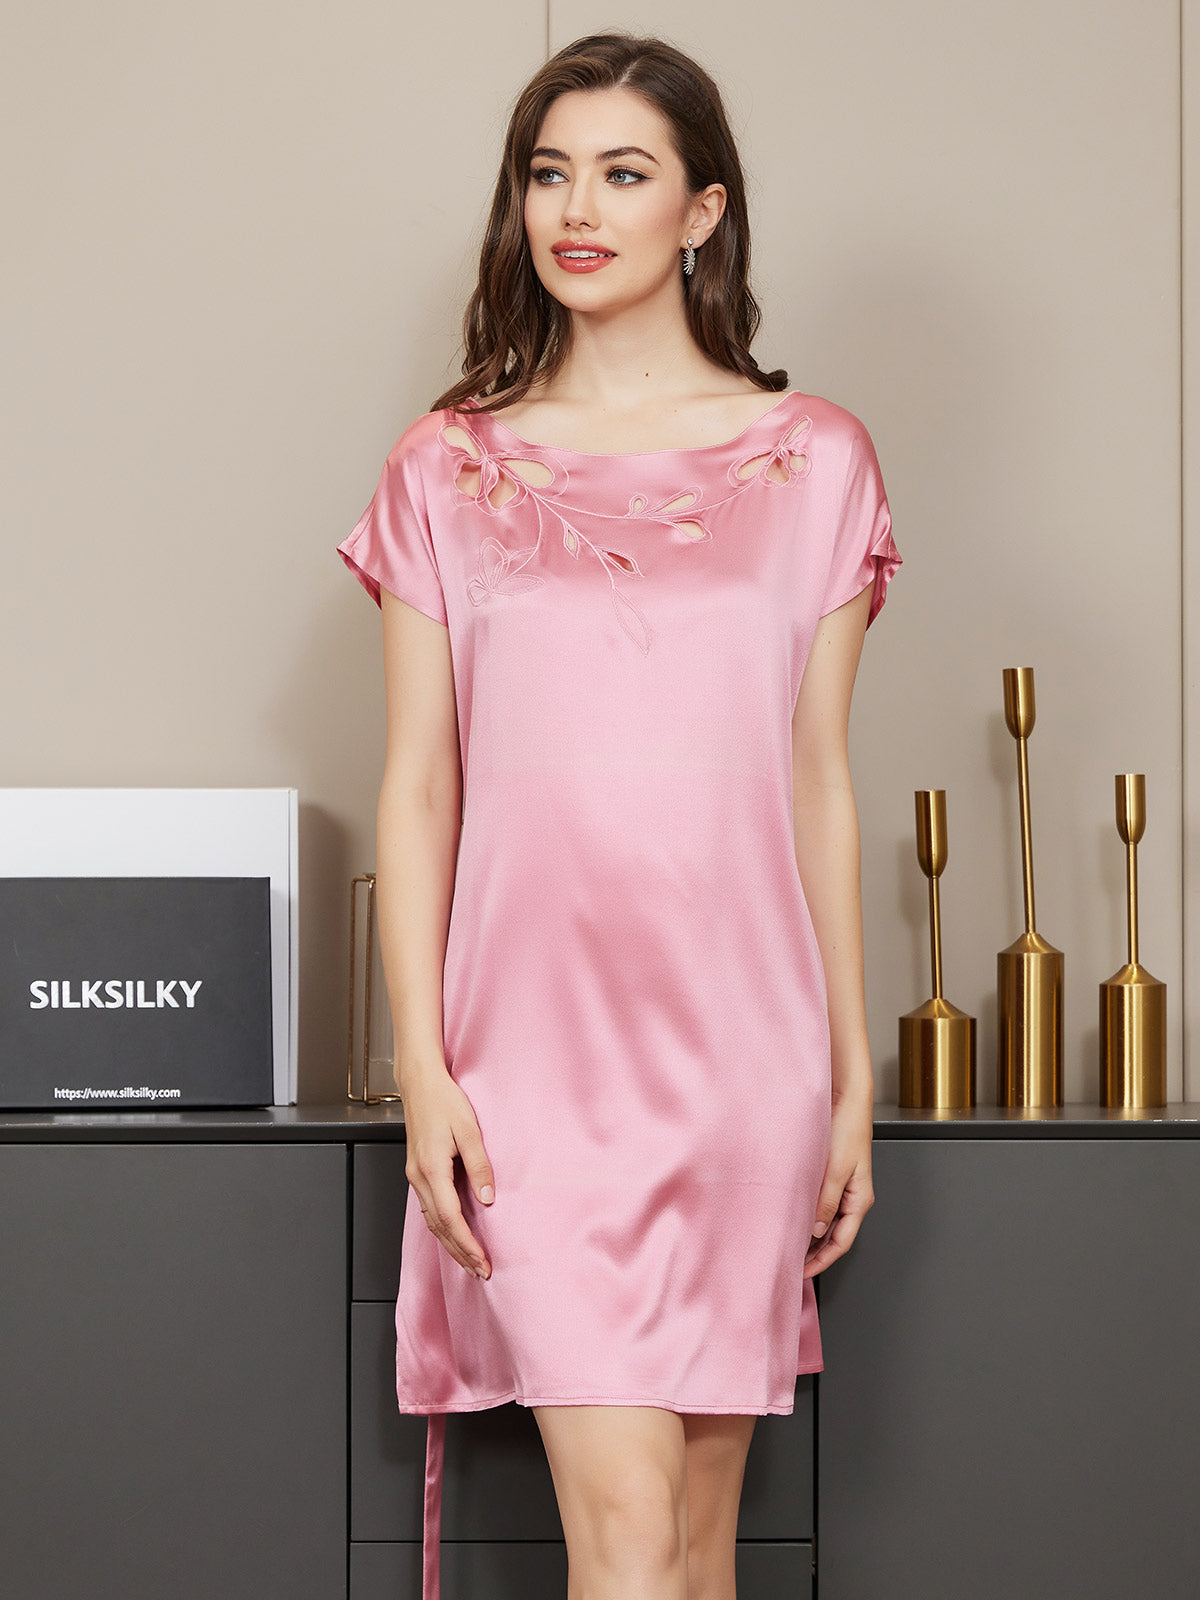 LoraLai - Pure silk NightGown - ORDER NOW!